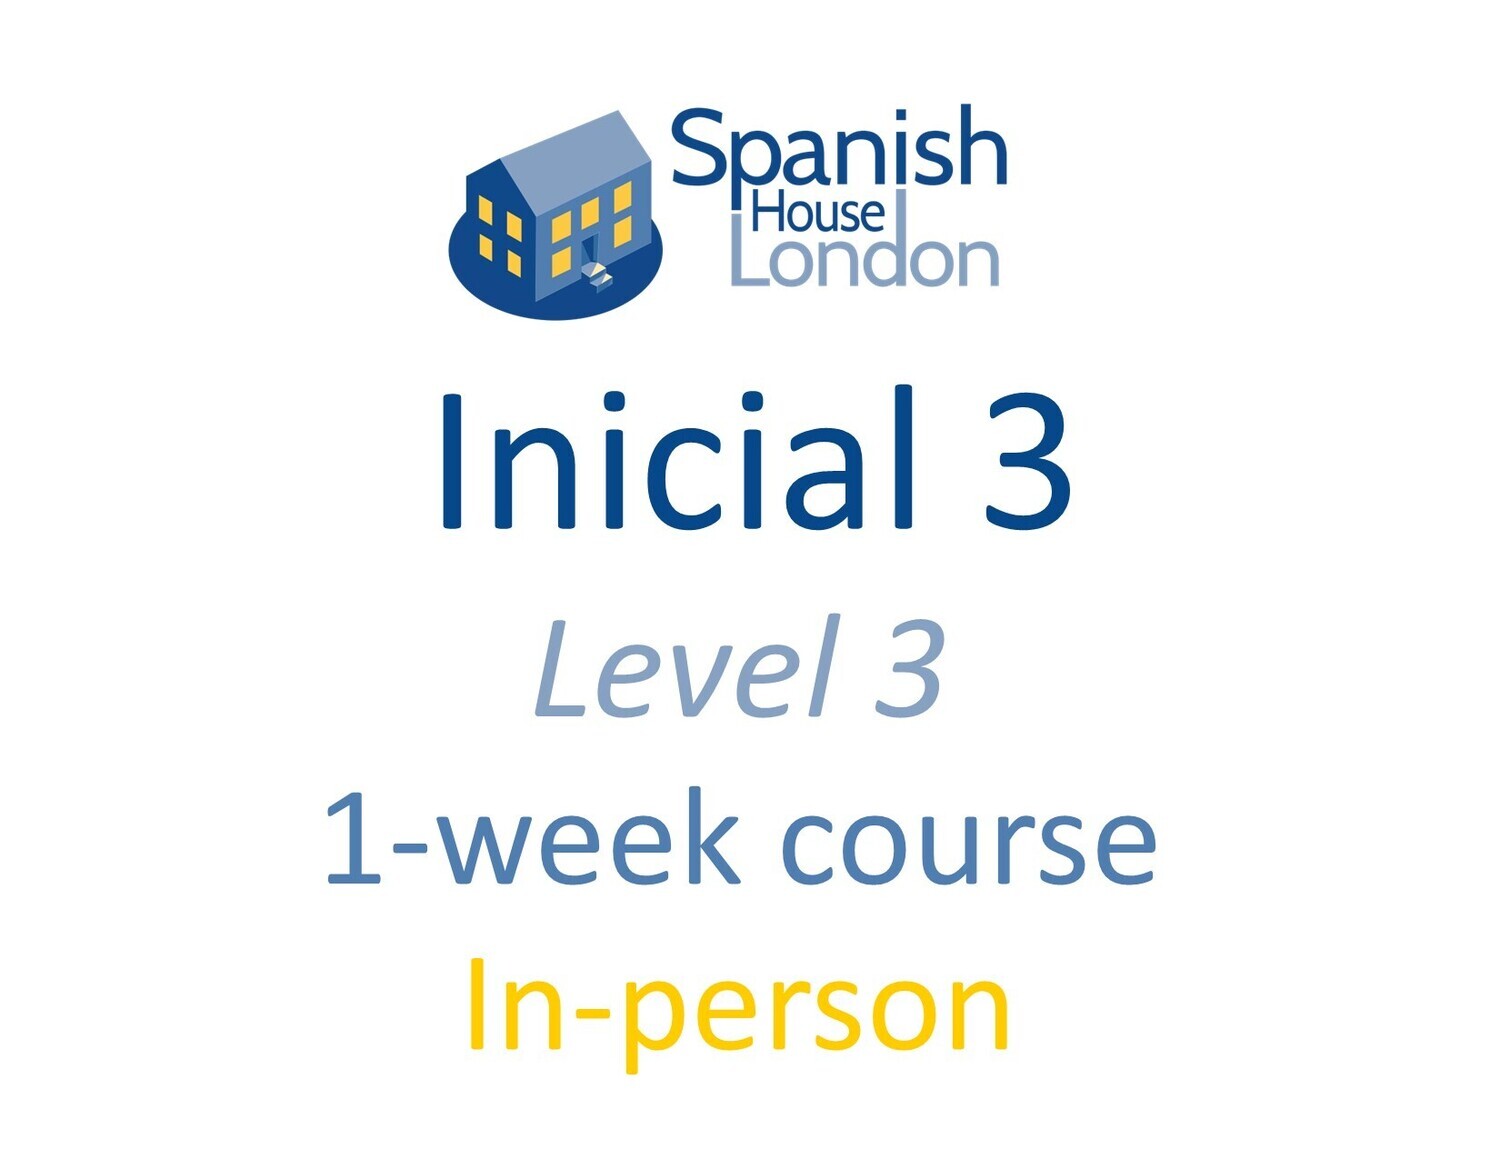 One-Week Intensive Inicial 3 Course starting on 11th December at 10.30am in Clapham North